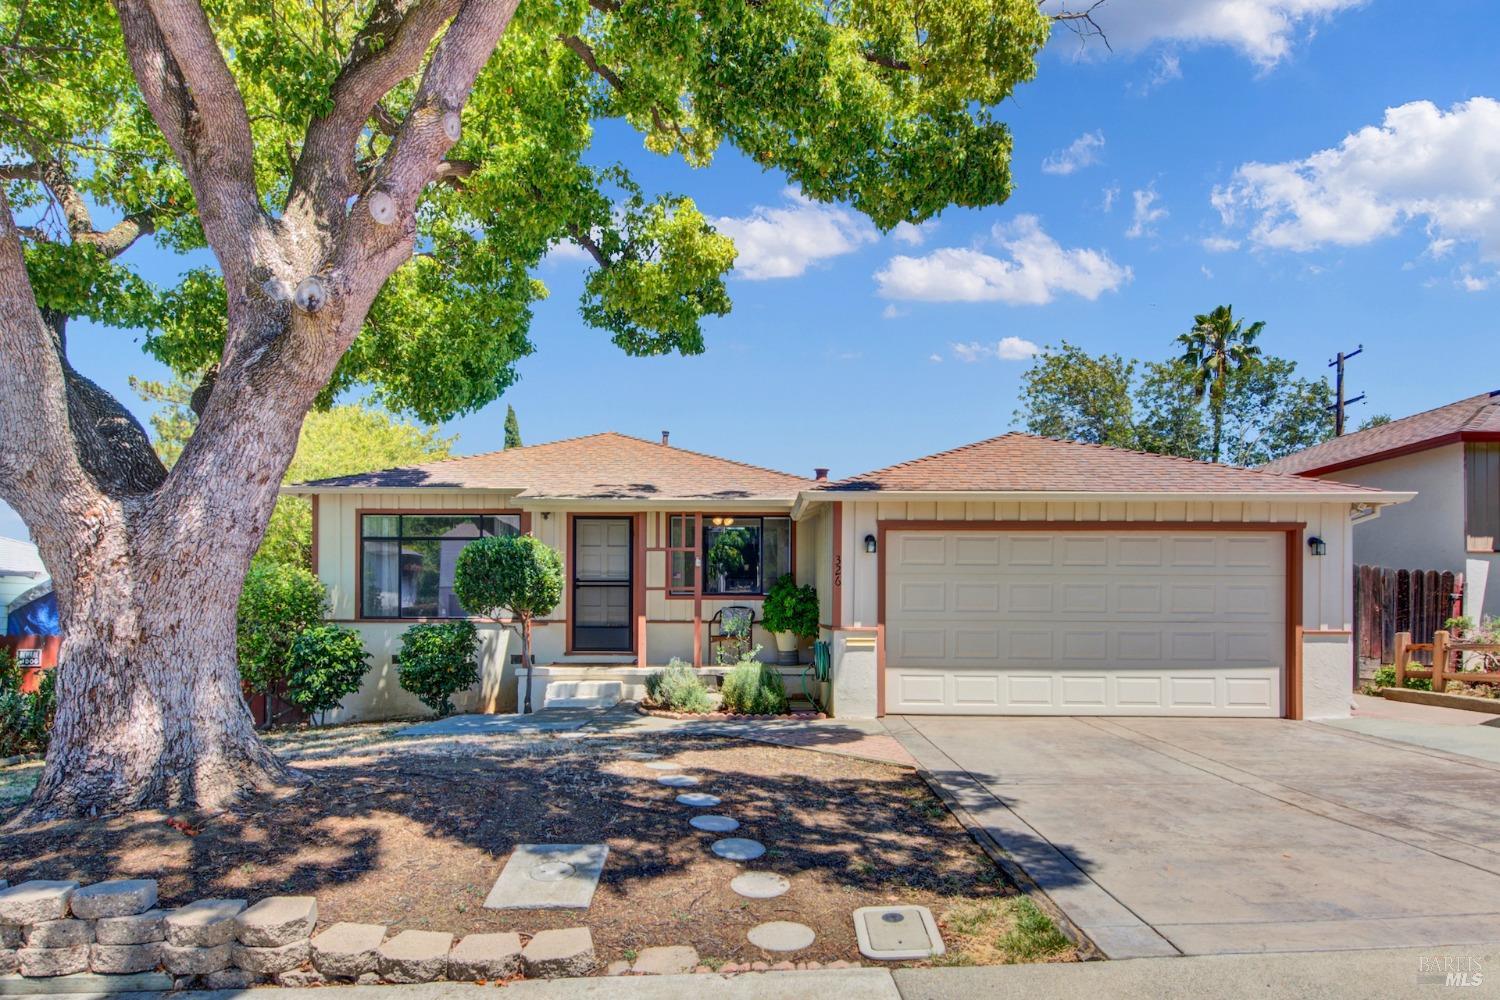 Nestled in a sought-after Vallejo area, this immaculate single-story home features possible small RV